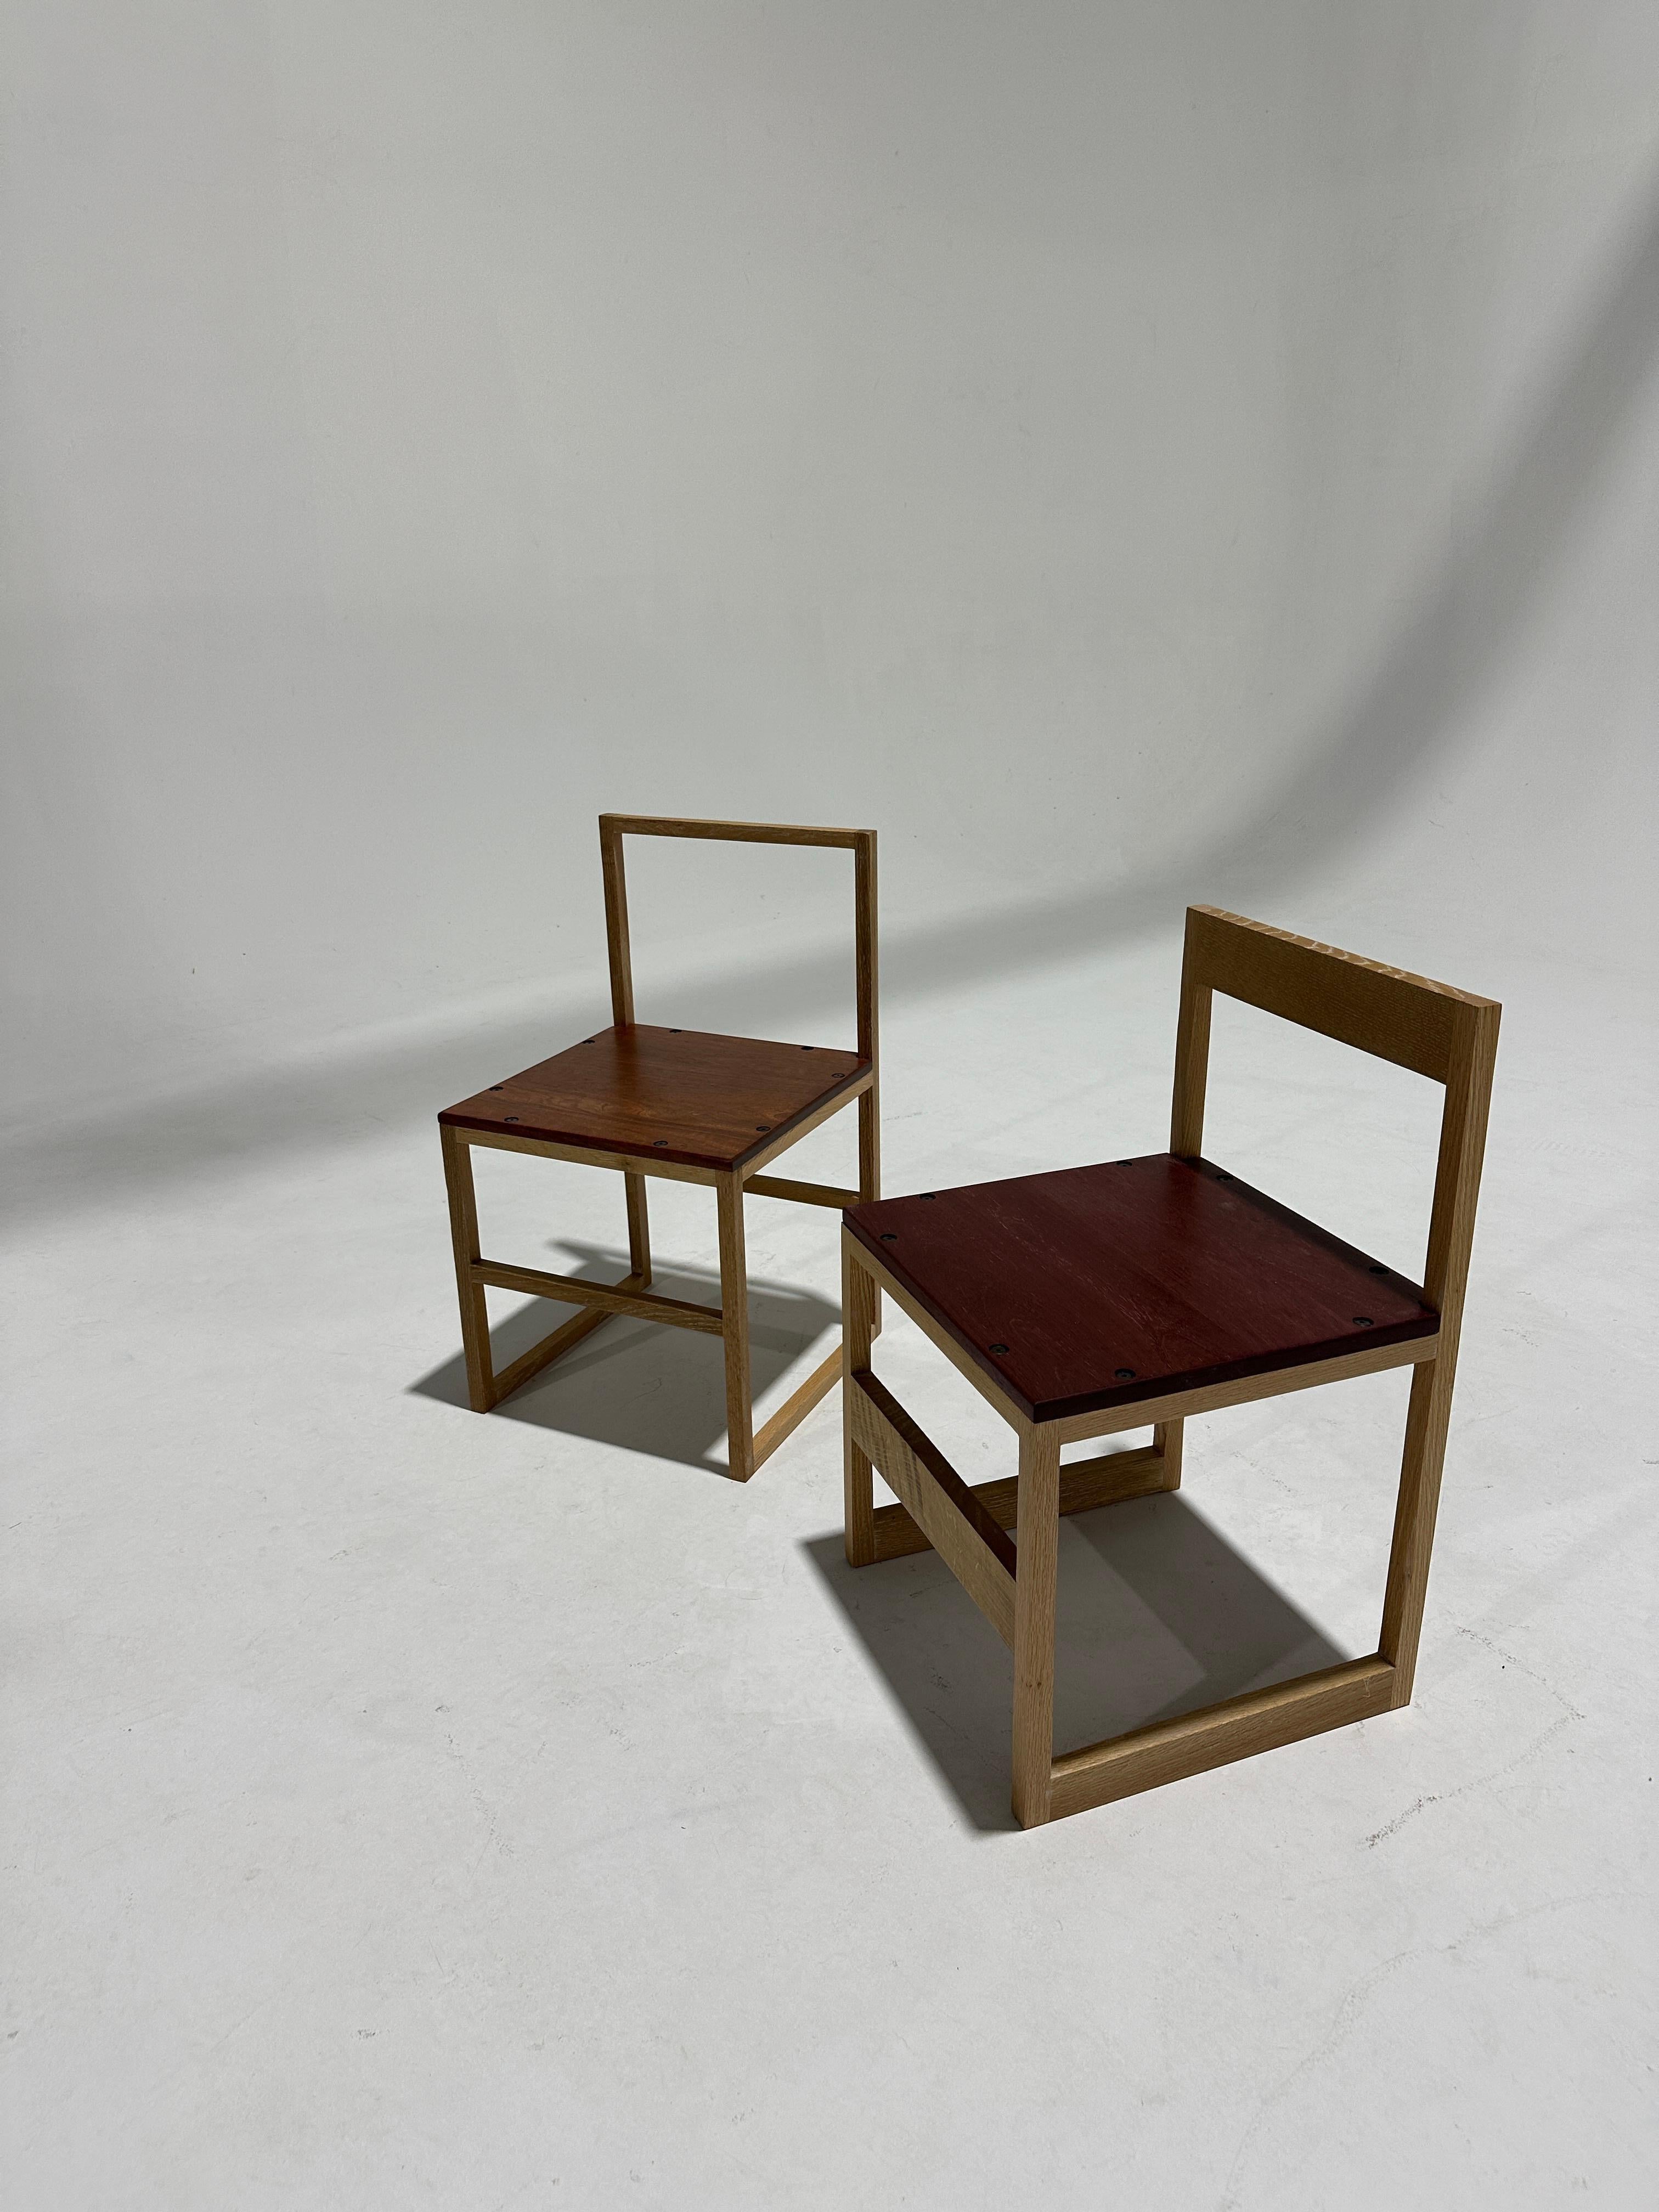 American Craft, hand made accent chairs . Made from white oak, padouk and purple heart wood. These chairs are produced by Mayfly Studio under designer Michael Oates. Drawing influence from the New Hope area and its neighboring river towns, paying